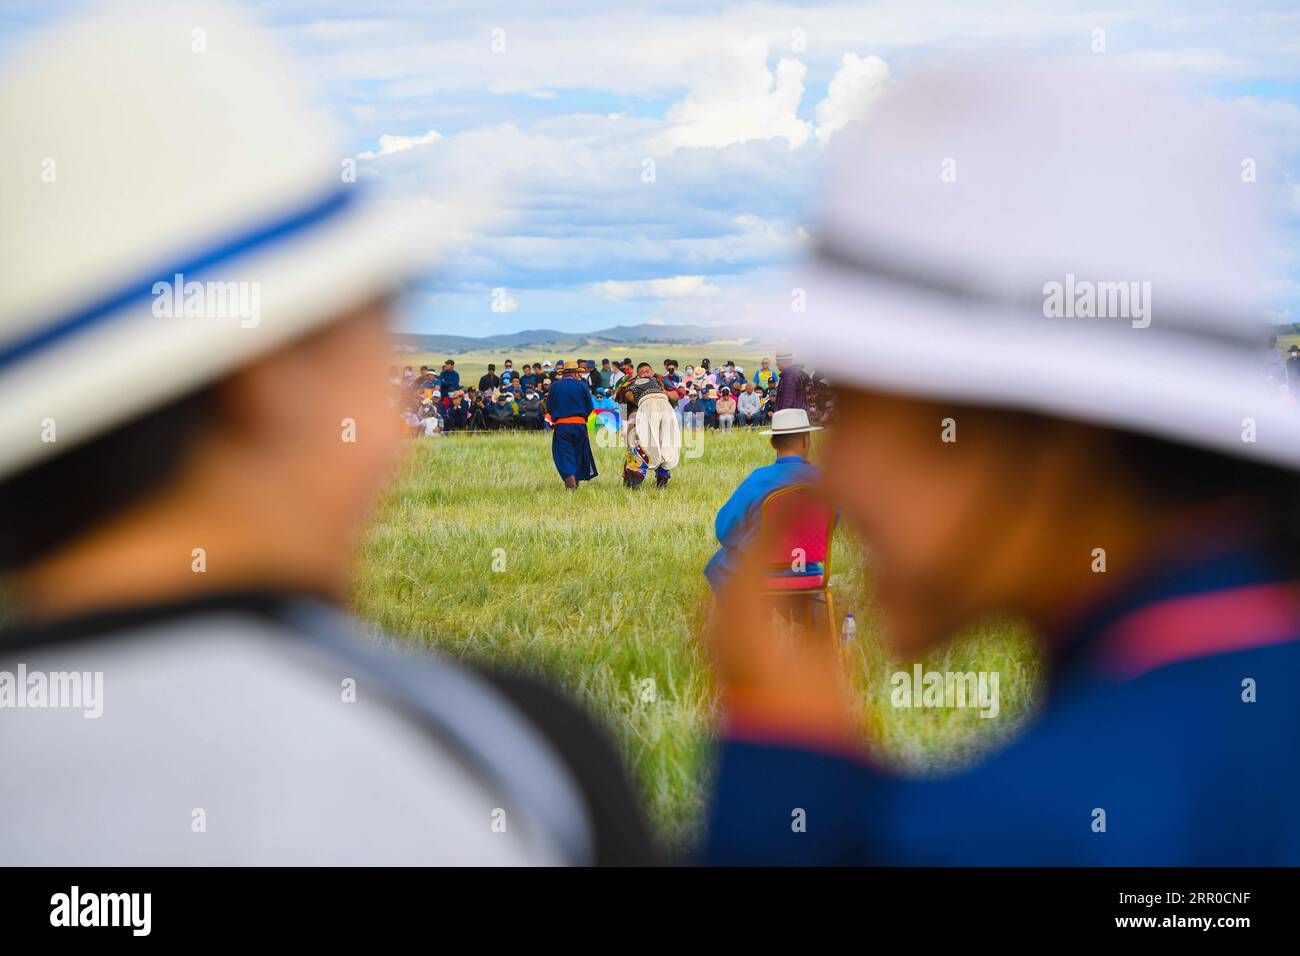 200809 -- XILIN GOL, Aug. 9, 2020 -- Xilinhua R and a friend watch a wrestling match during a Naadam event held on the Baiyinxile grassland in Xilinhot, north China s Inner Mongolia Autonomous Region, Aug. 3, 2020. Summer vationtion has been Xilinhua s favorite time of year. In order to attend middle school, the 14-year-old lives most of the time with her grandparents in downtown Xilinhot, separated from her parents who run a ranch on the Baiyinxile pasture. Therefore, summer means both relaxation and reunion to the seventh grader. Xilinhua s father Gangsuhe is a famous horse rider. Learning f Stock Photo